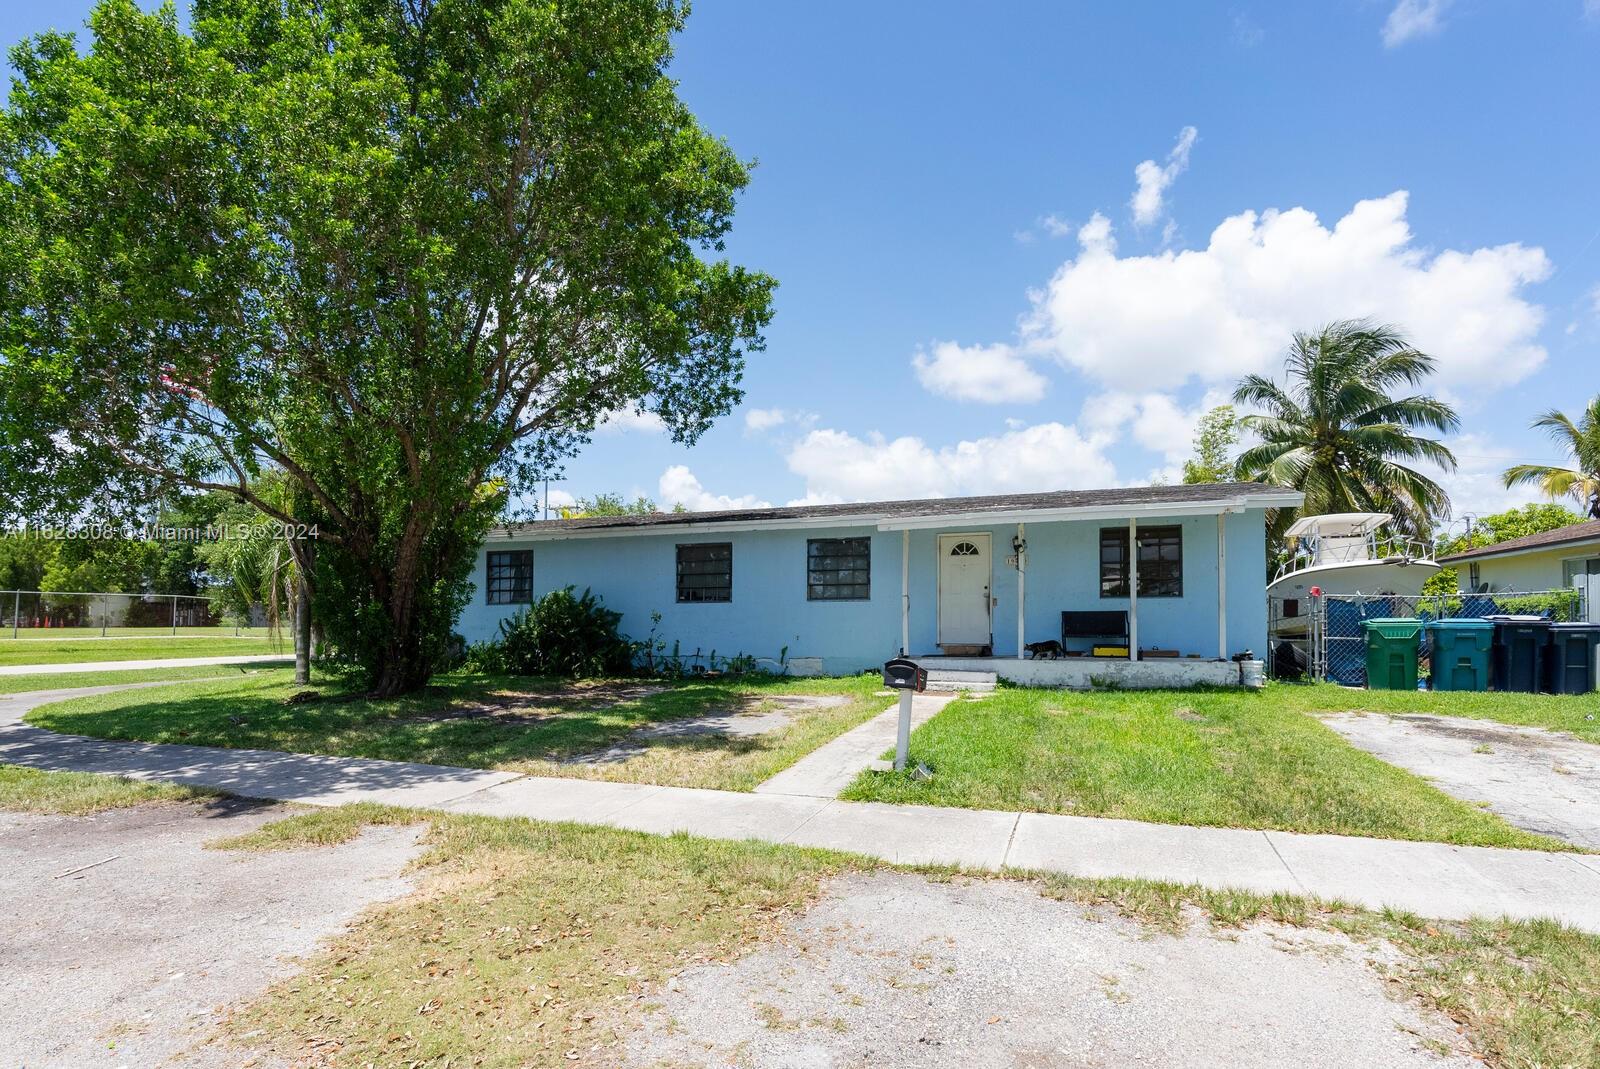 This 4-bedroom, 2-bathroom wood frame home in Cutler Bay is a renovator's dream, priced to sell and ready for a total makeover. Situated on a spacious corner lot, this property is just a block away from the vibrant Cutler Ridge Park and pool, where the community gathers for events like the chili cook-off, holiday celebrations, and food truck nights. With its prime location and great potential, this home offers a unique opportunity to create something special!  Don't miss your chance to transform this diamond in the rough into your dream home. Call to make your appointment today.